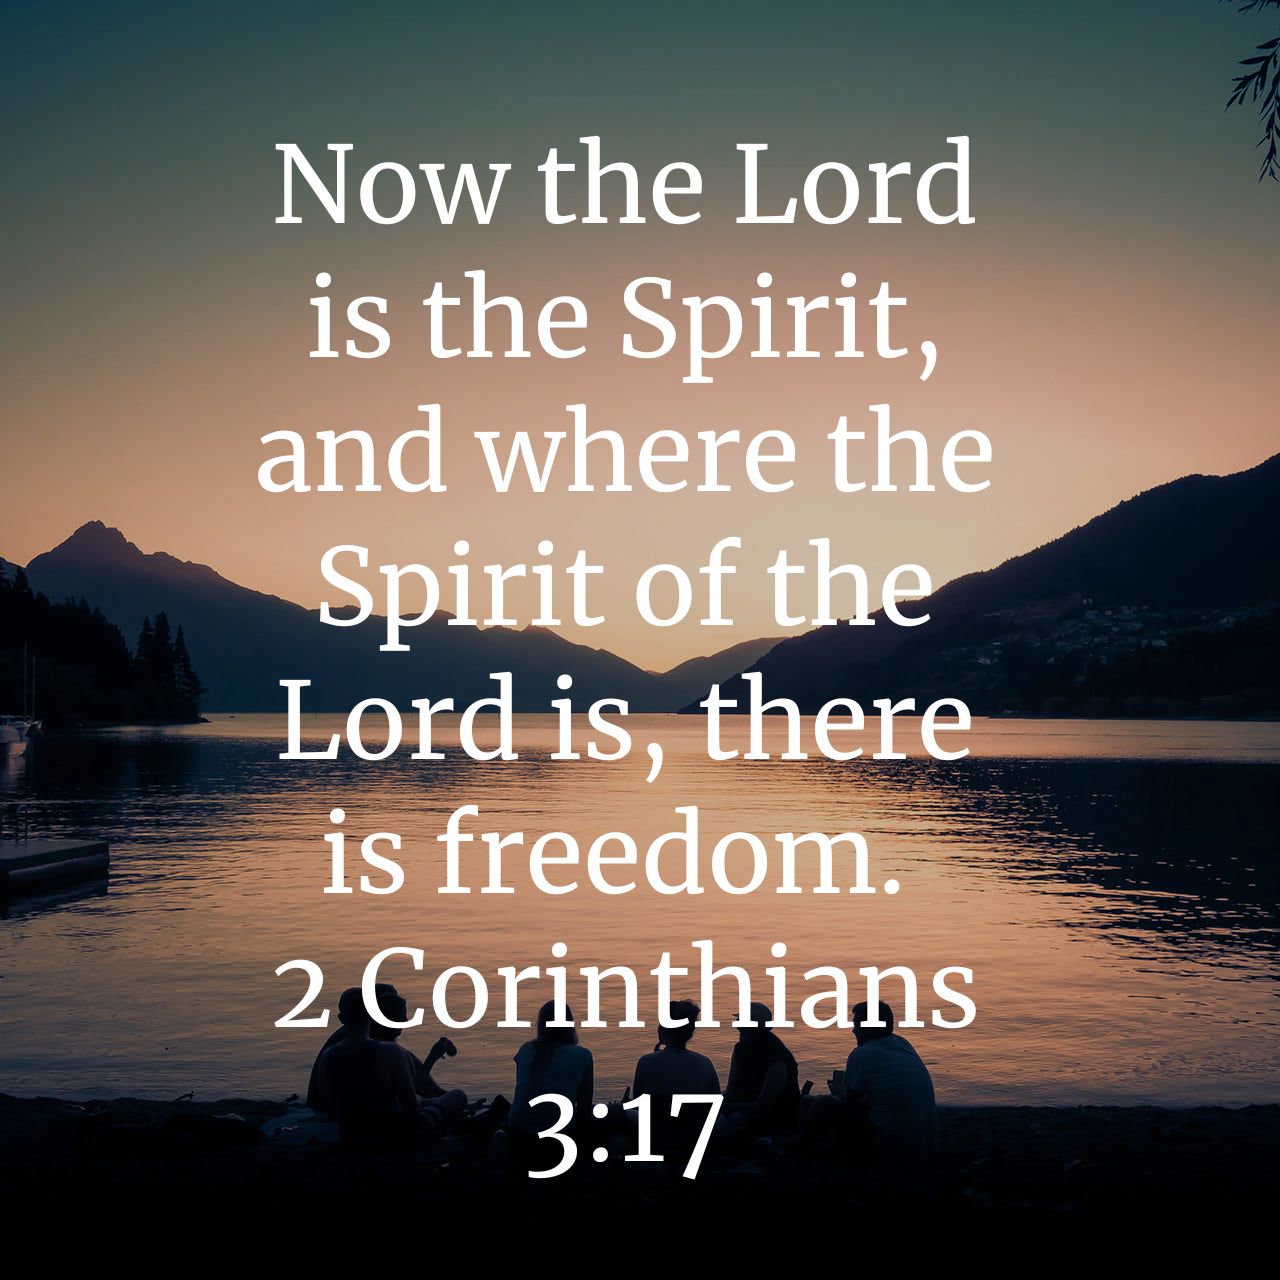 Now the Lord is the Spirit, and where the Spirit of the Lord is, there iS freedom: 2 Corinthians 3.17